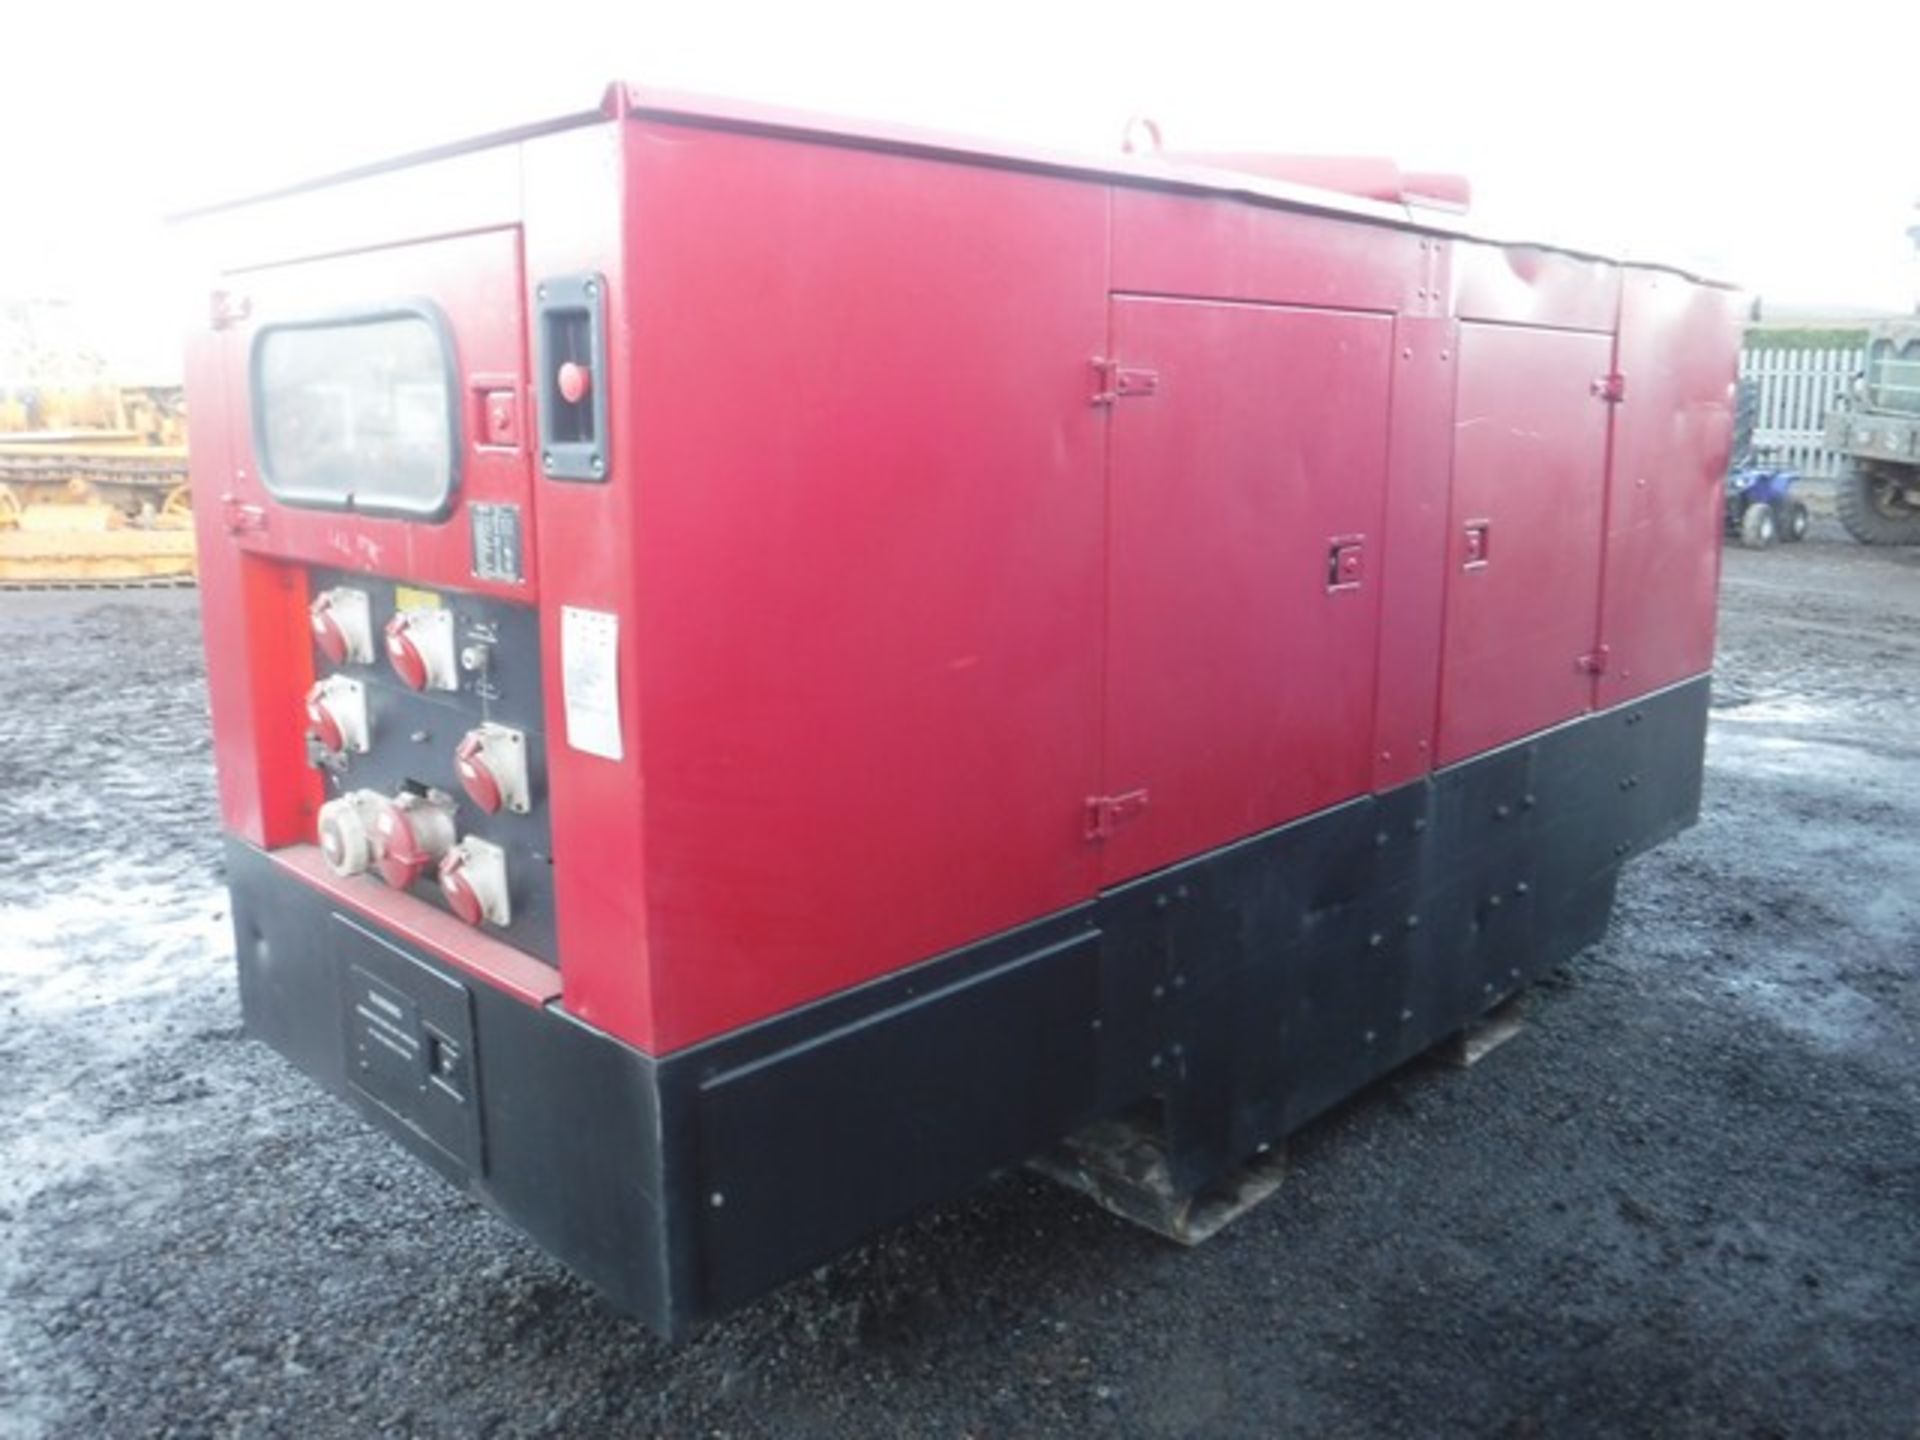 GENSET MG115SS-D GENERATOR 110KVA - 8136HRS (NOT VERIFIED) YEAR 2007 - Image 13 of 19